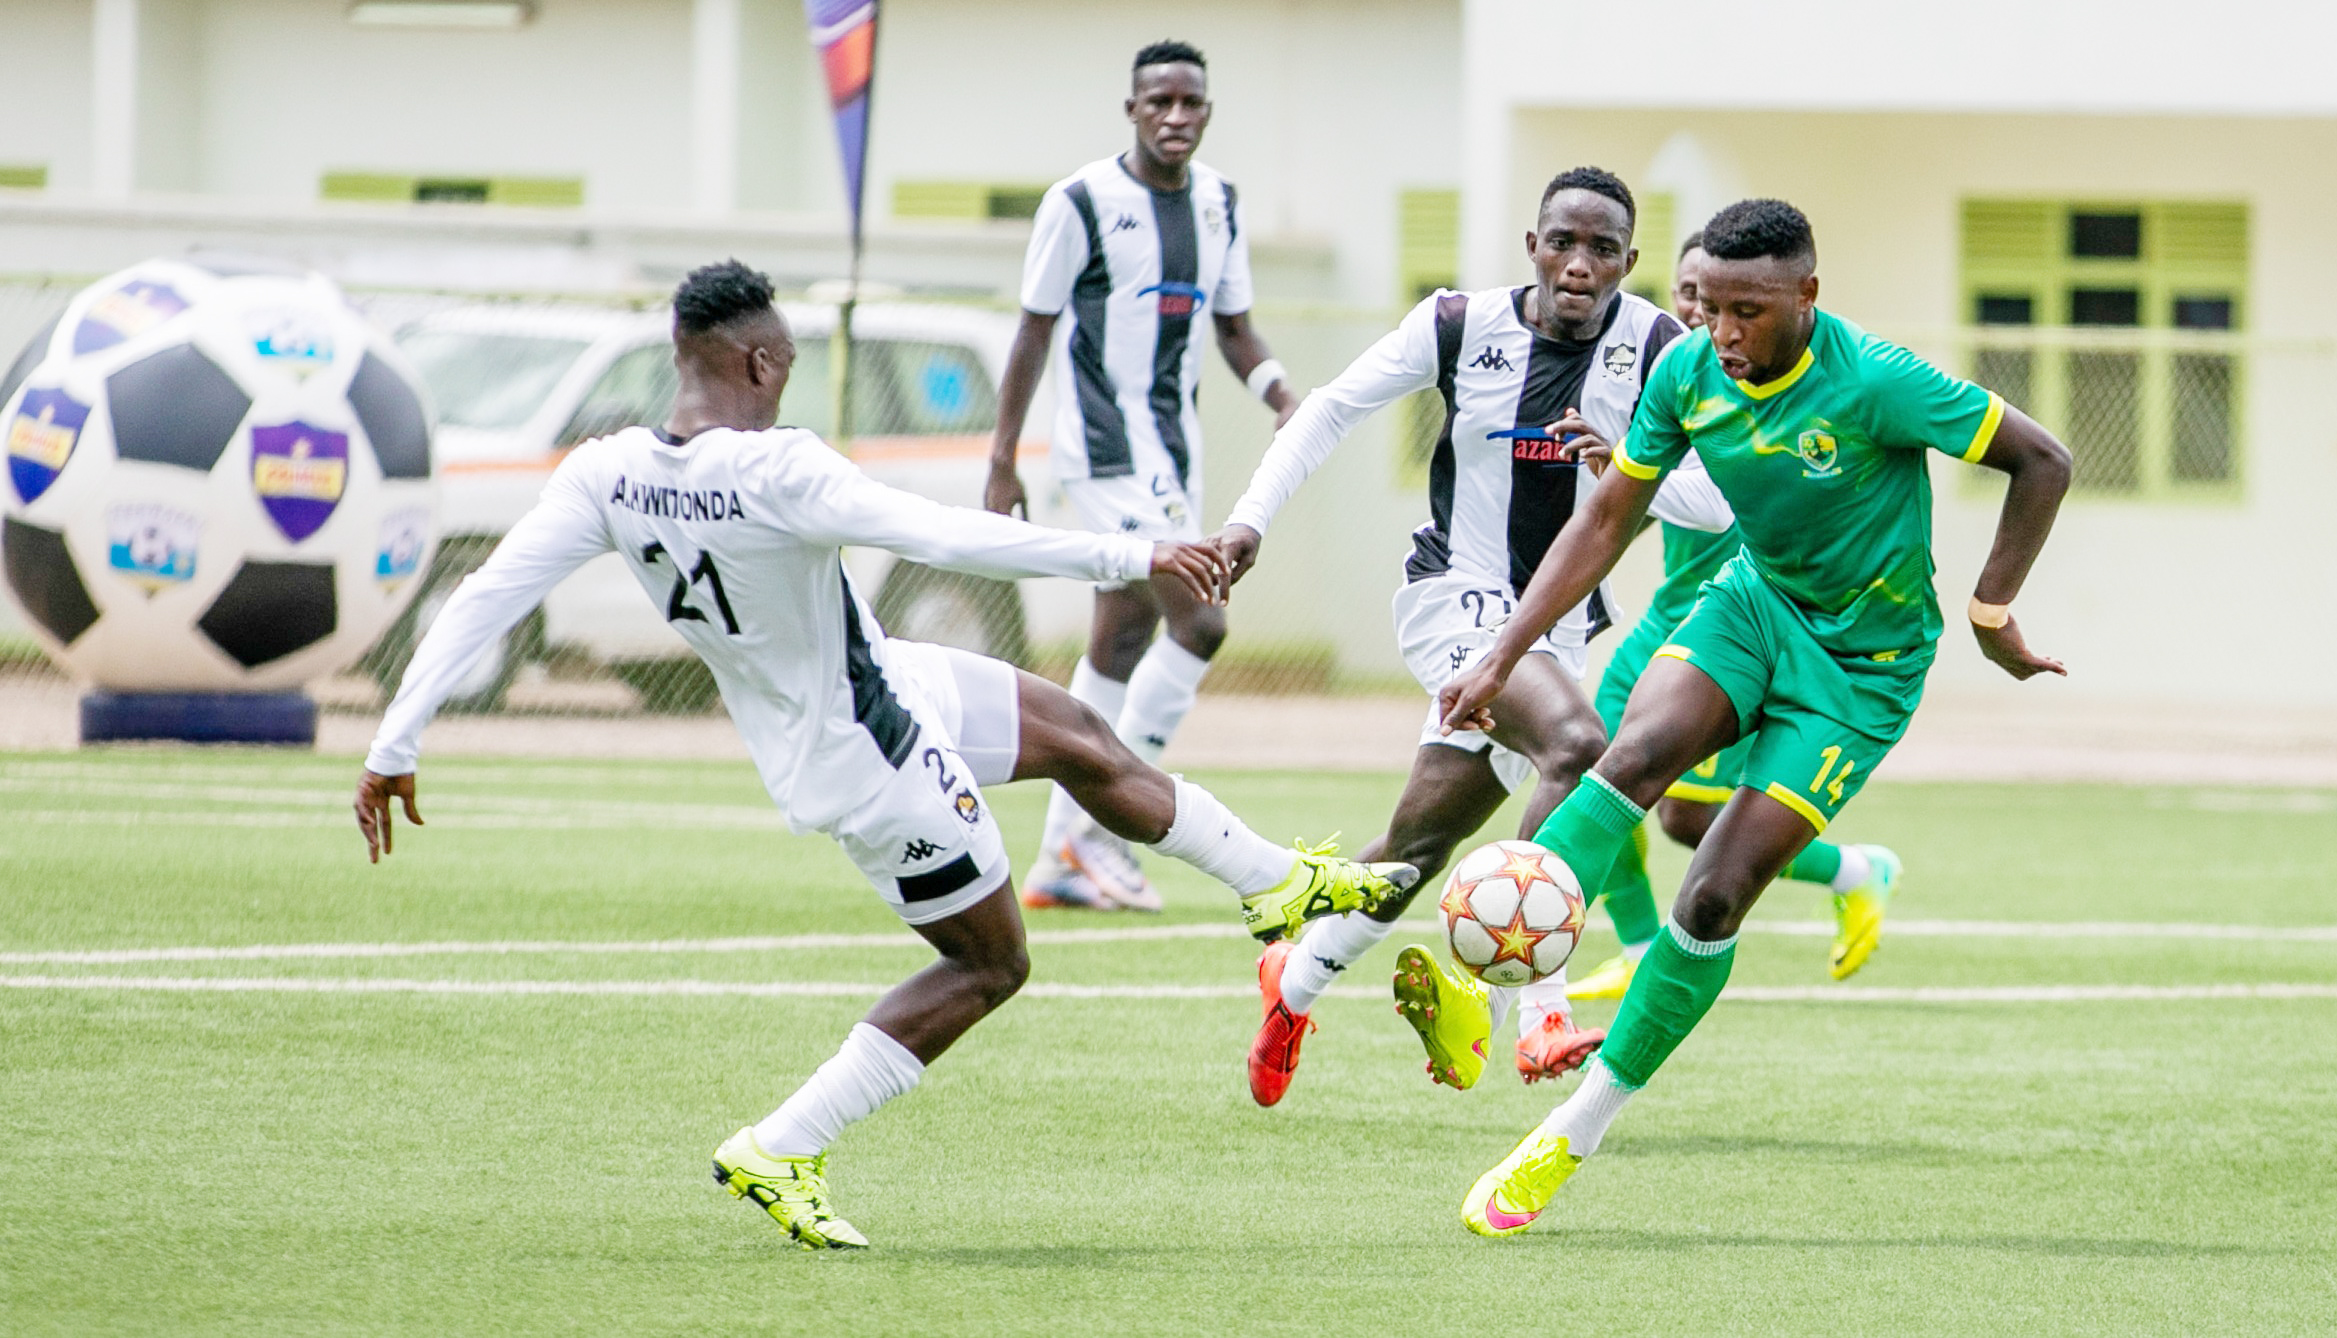 Marines FC player vies for the ball with APR FC players during the league match at Kigali Stadium on April 24, 2022. / Photo by Olivier Mugwiza 